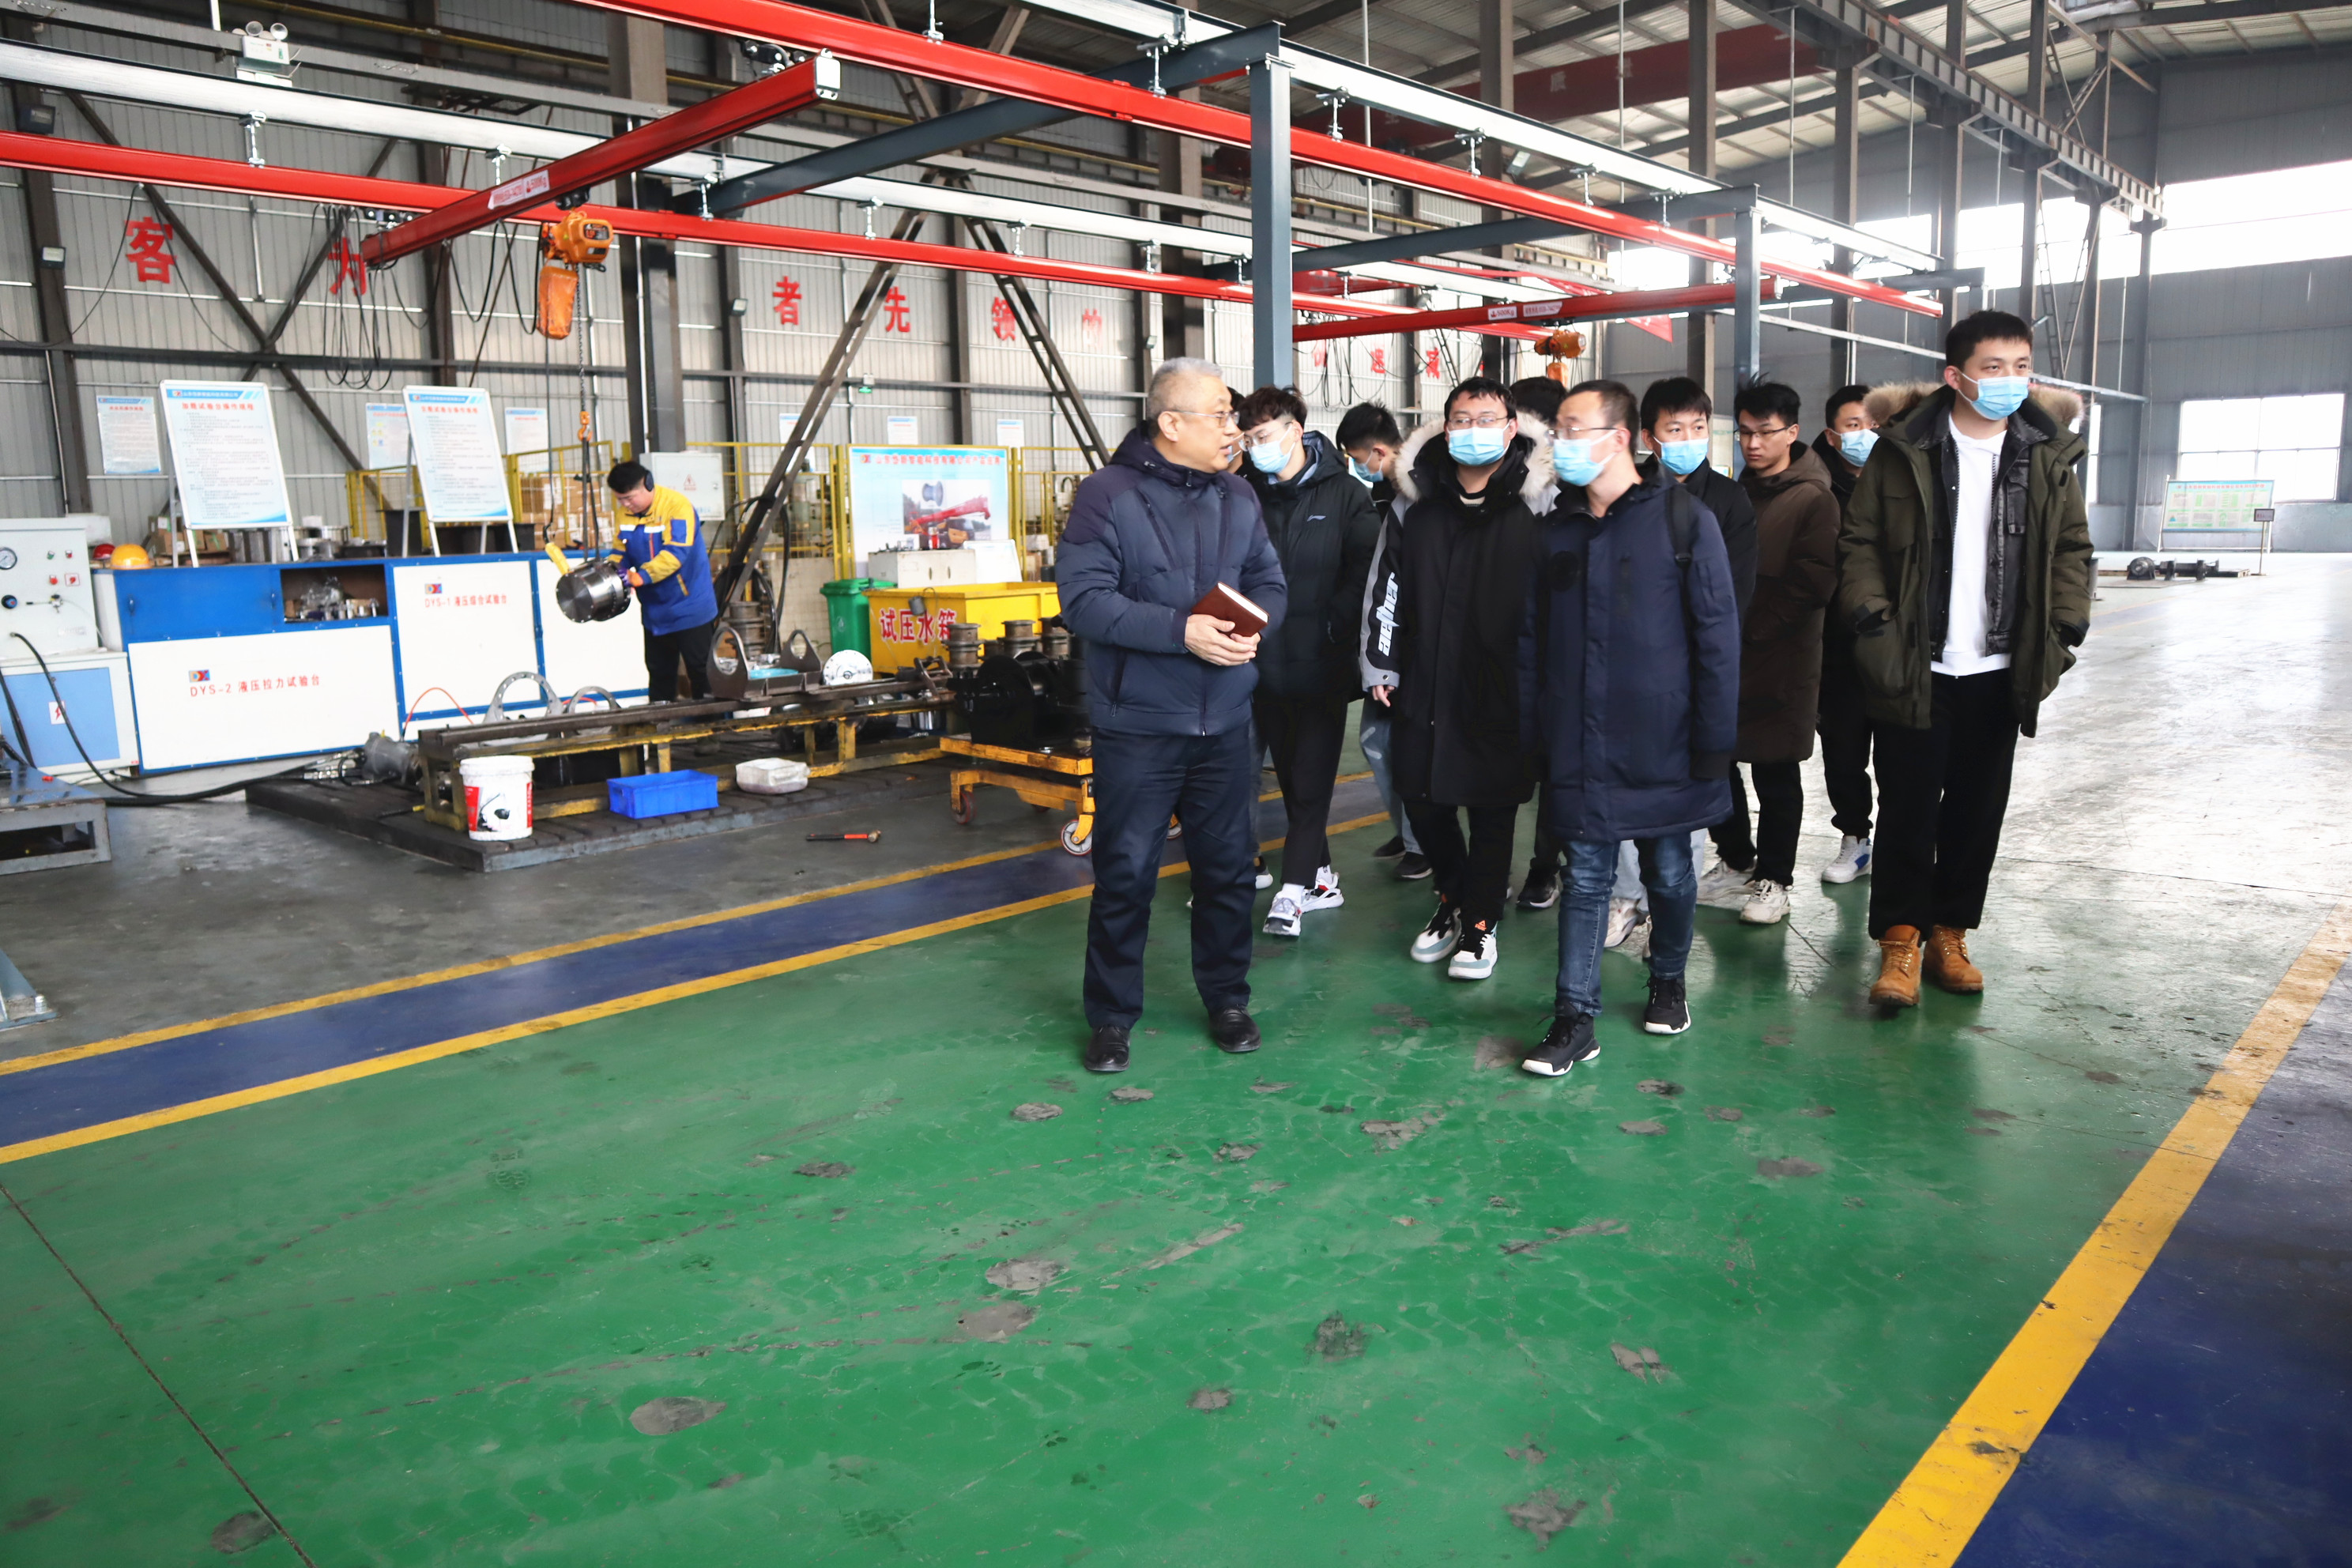 Graduate students from Shandong University of Science and Technology visited our factory for internship